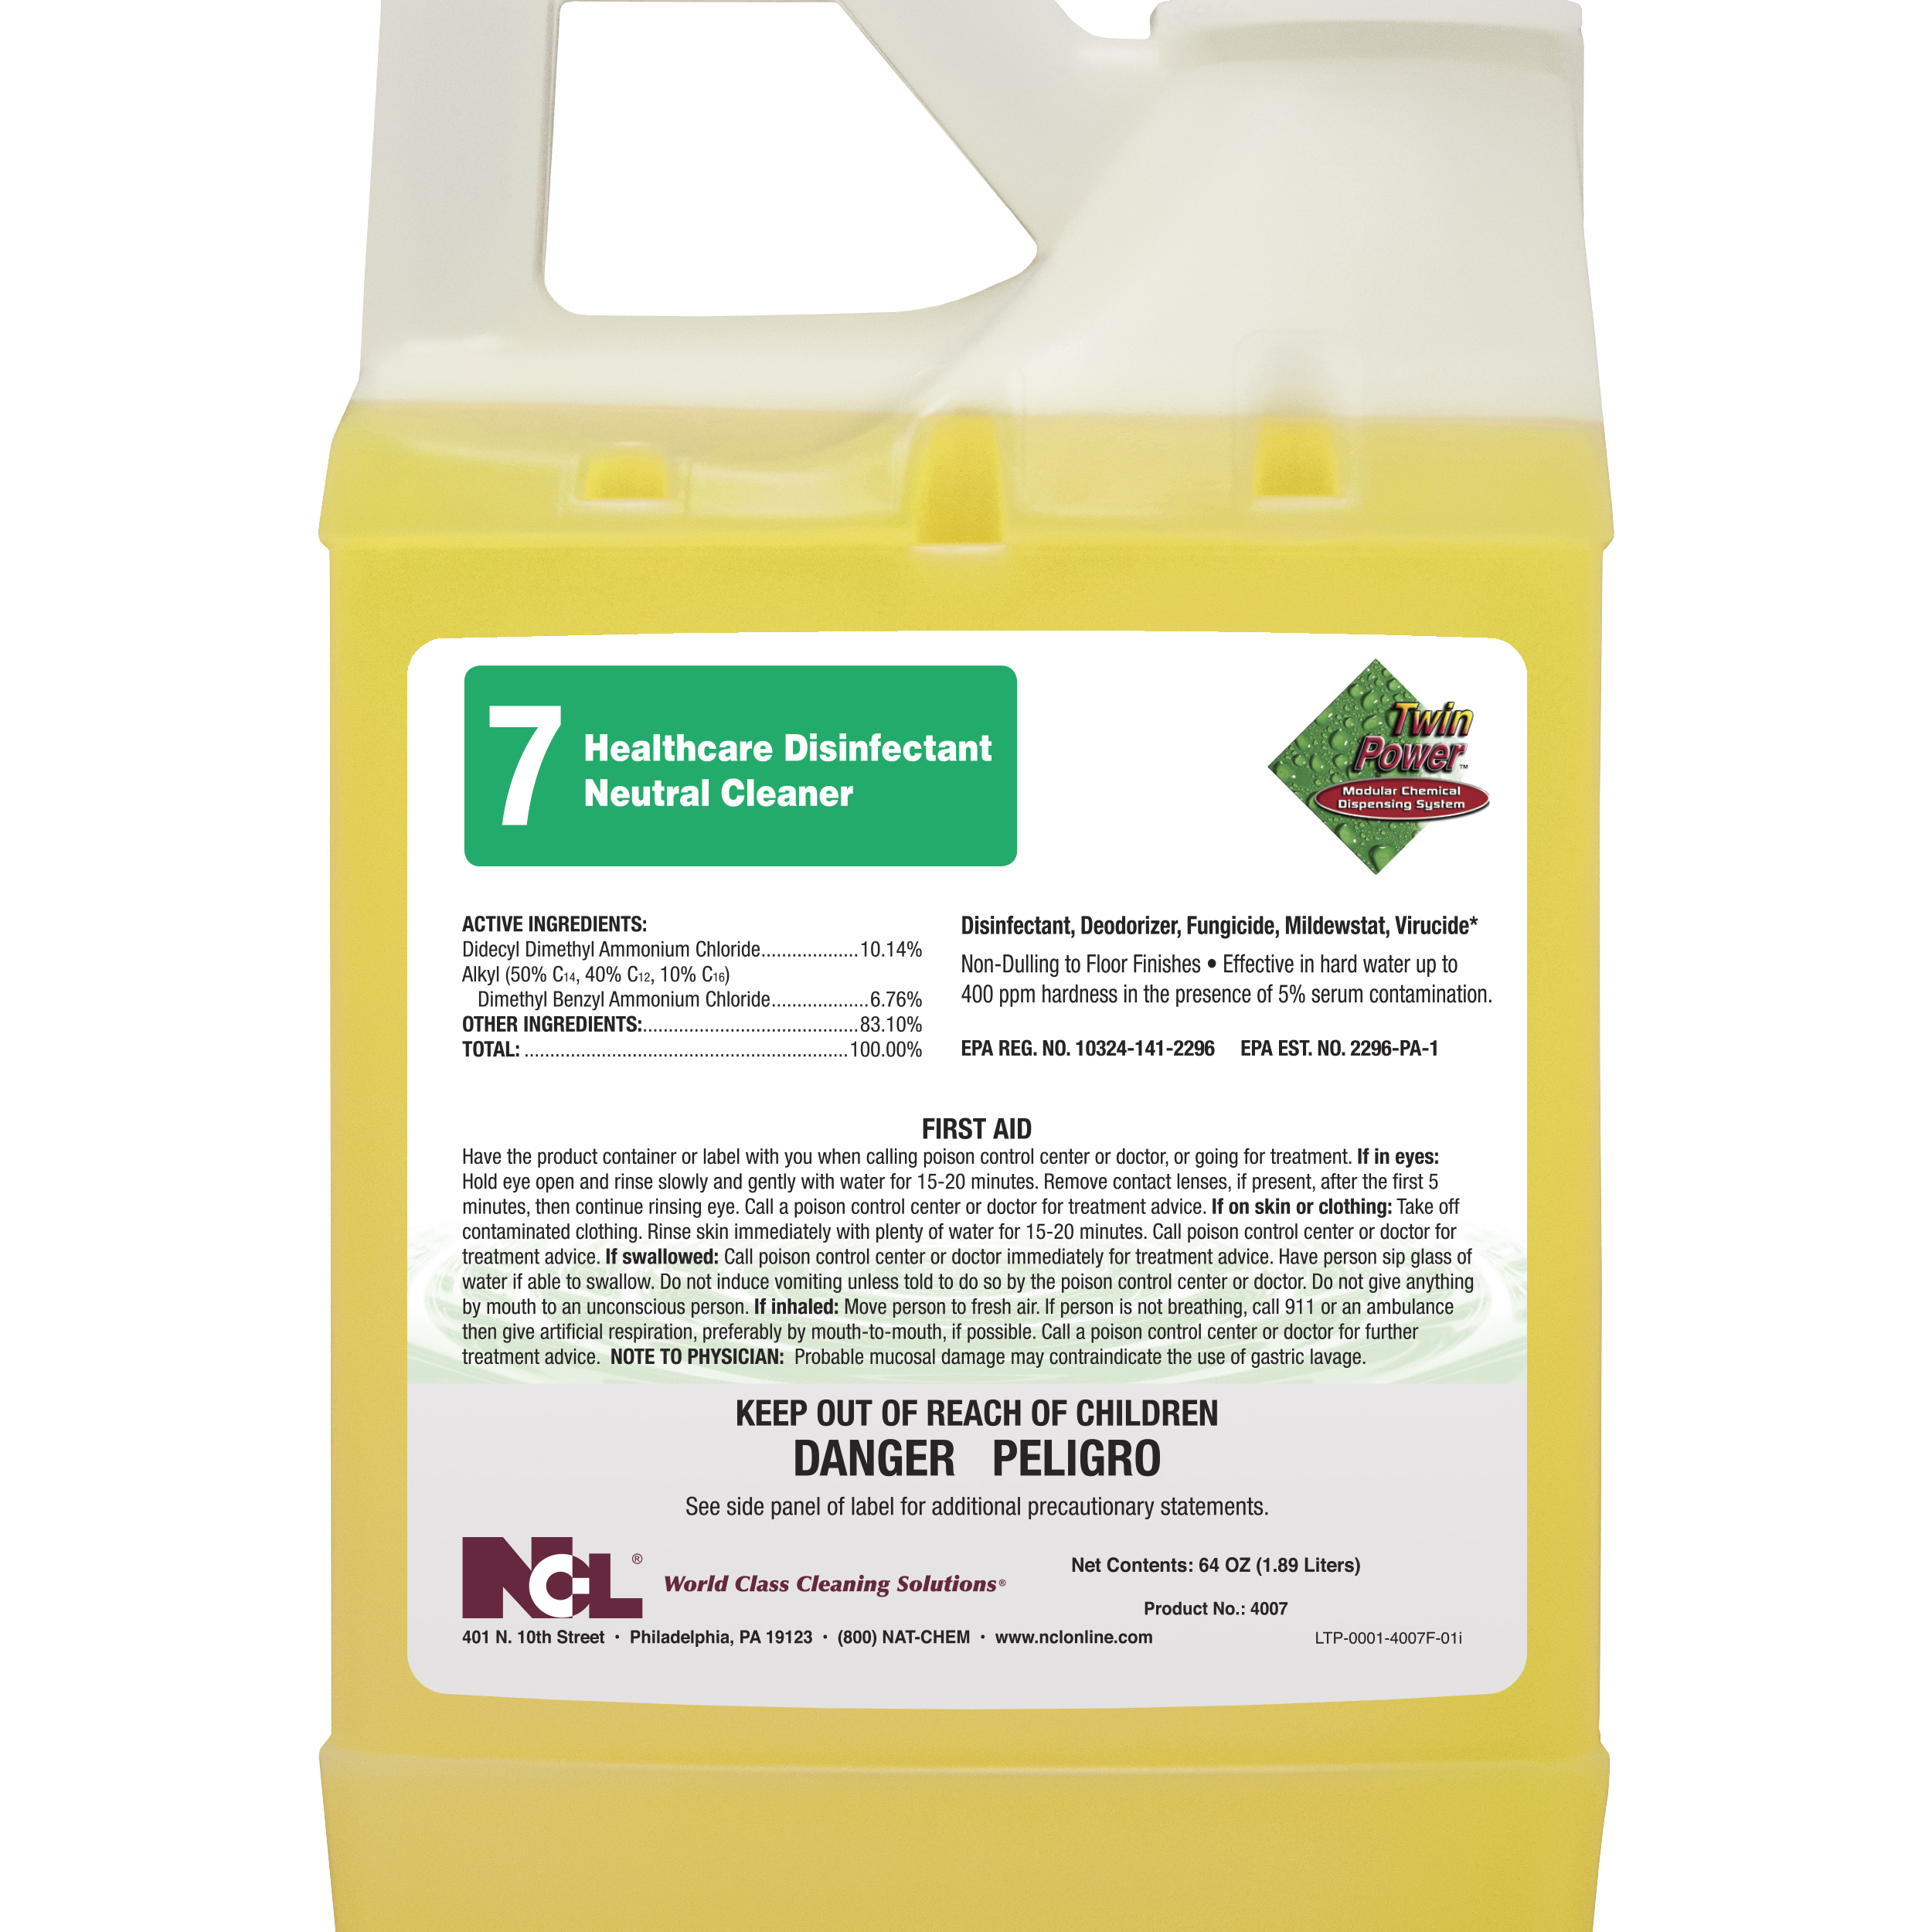  TWIN POWER #7 HEALTHCARE DISINFECTANT NEUTRAL CLEANER 6/64 oz Case (NCL4007-65) 